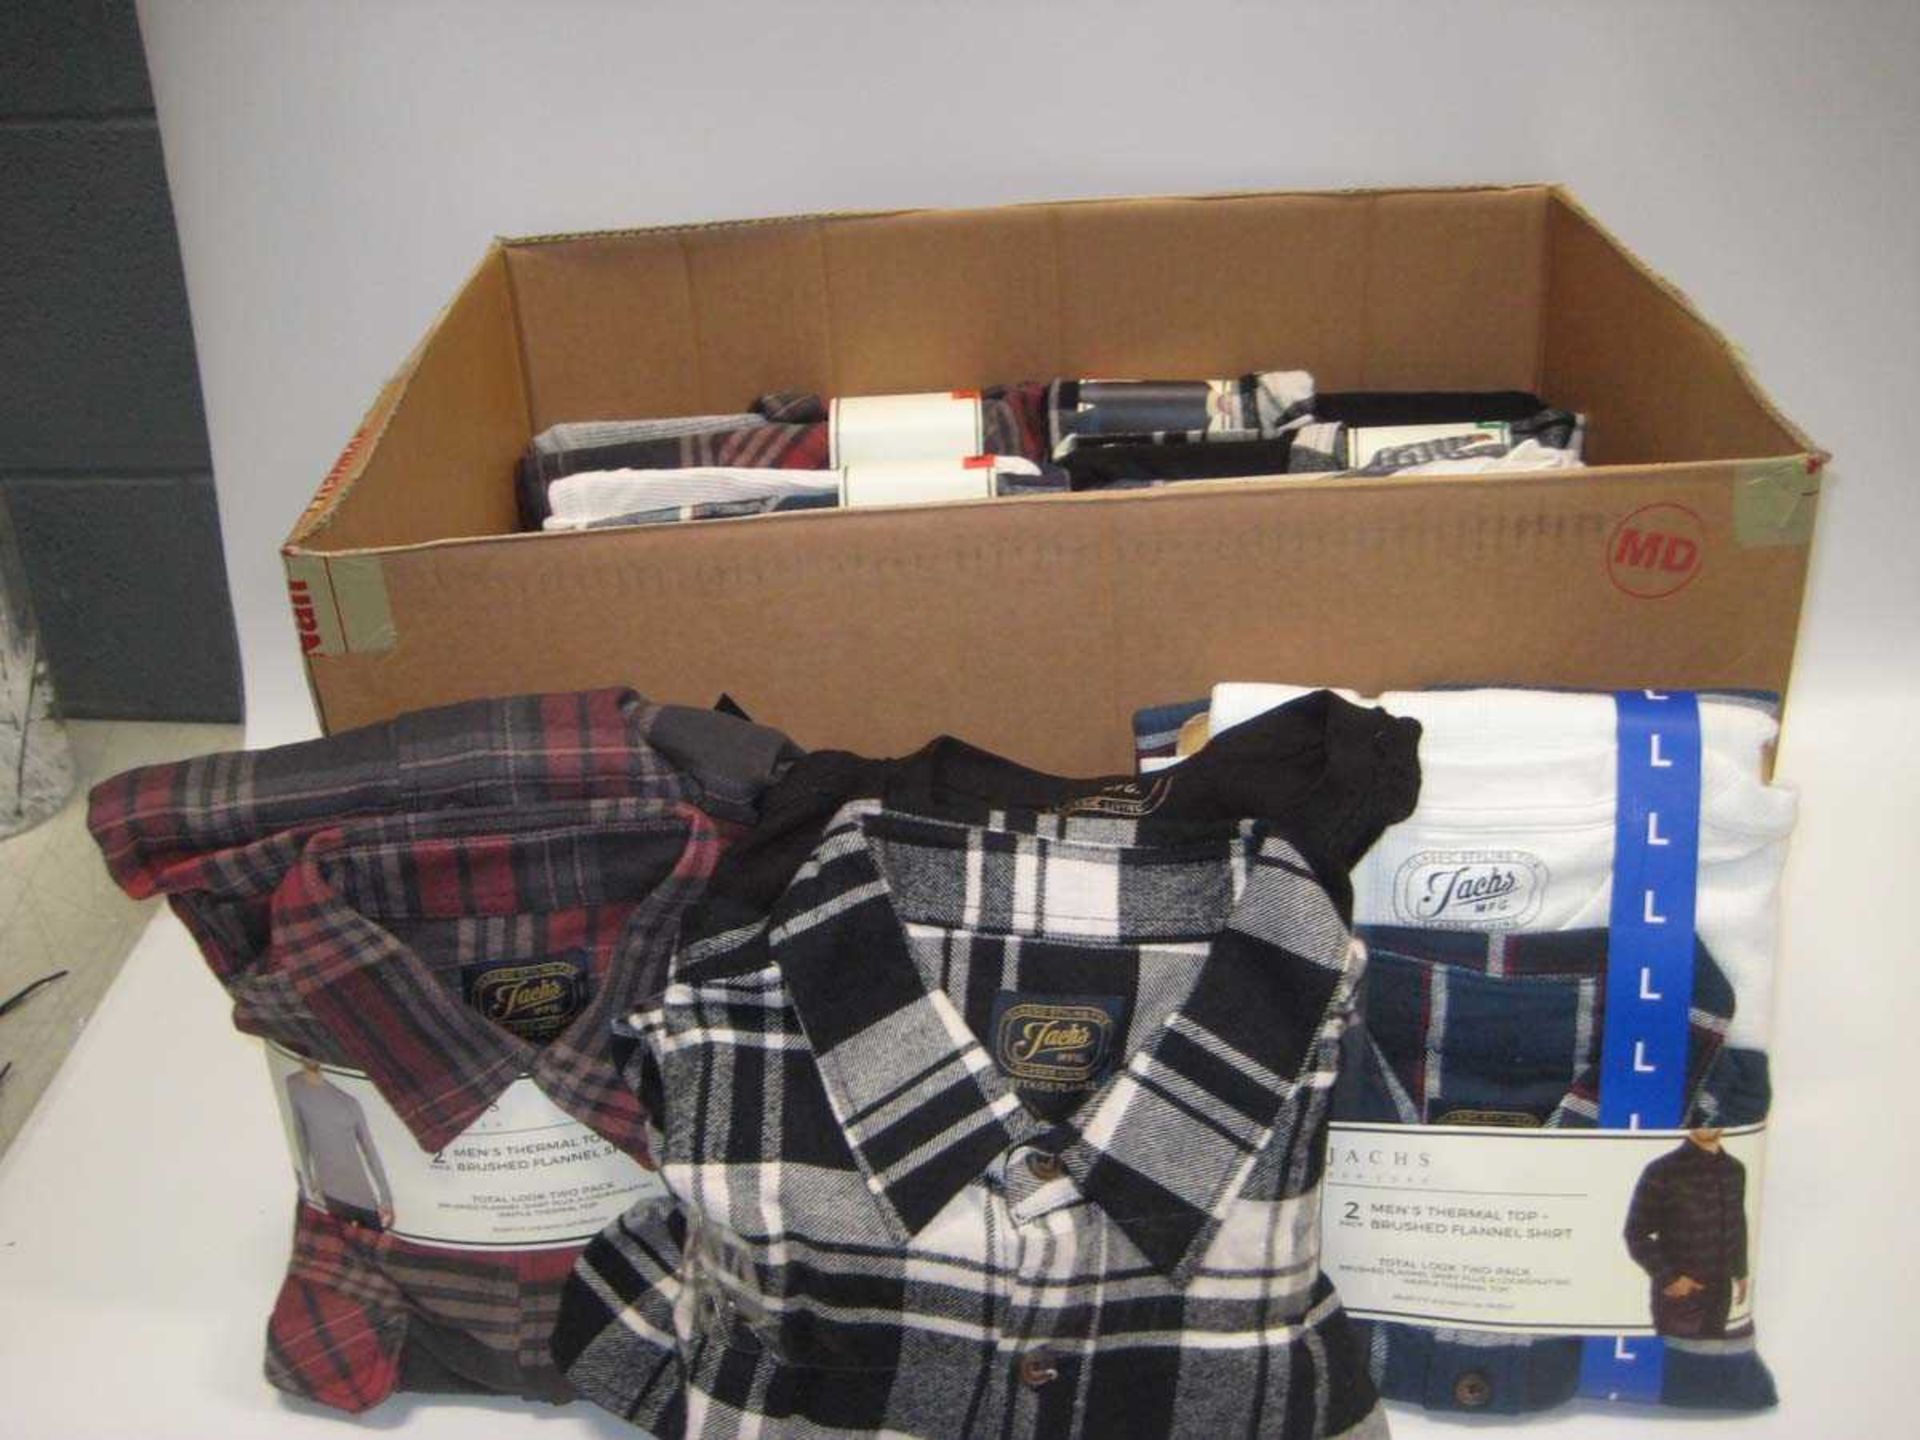 +VAT Box containing approx. 18 Jachs of New York shirt and long sleeve thermal tops